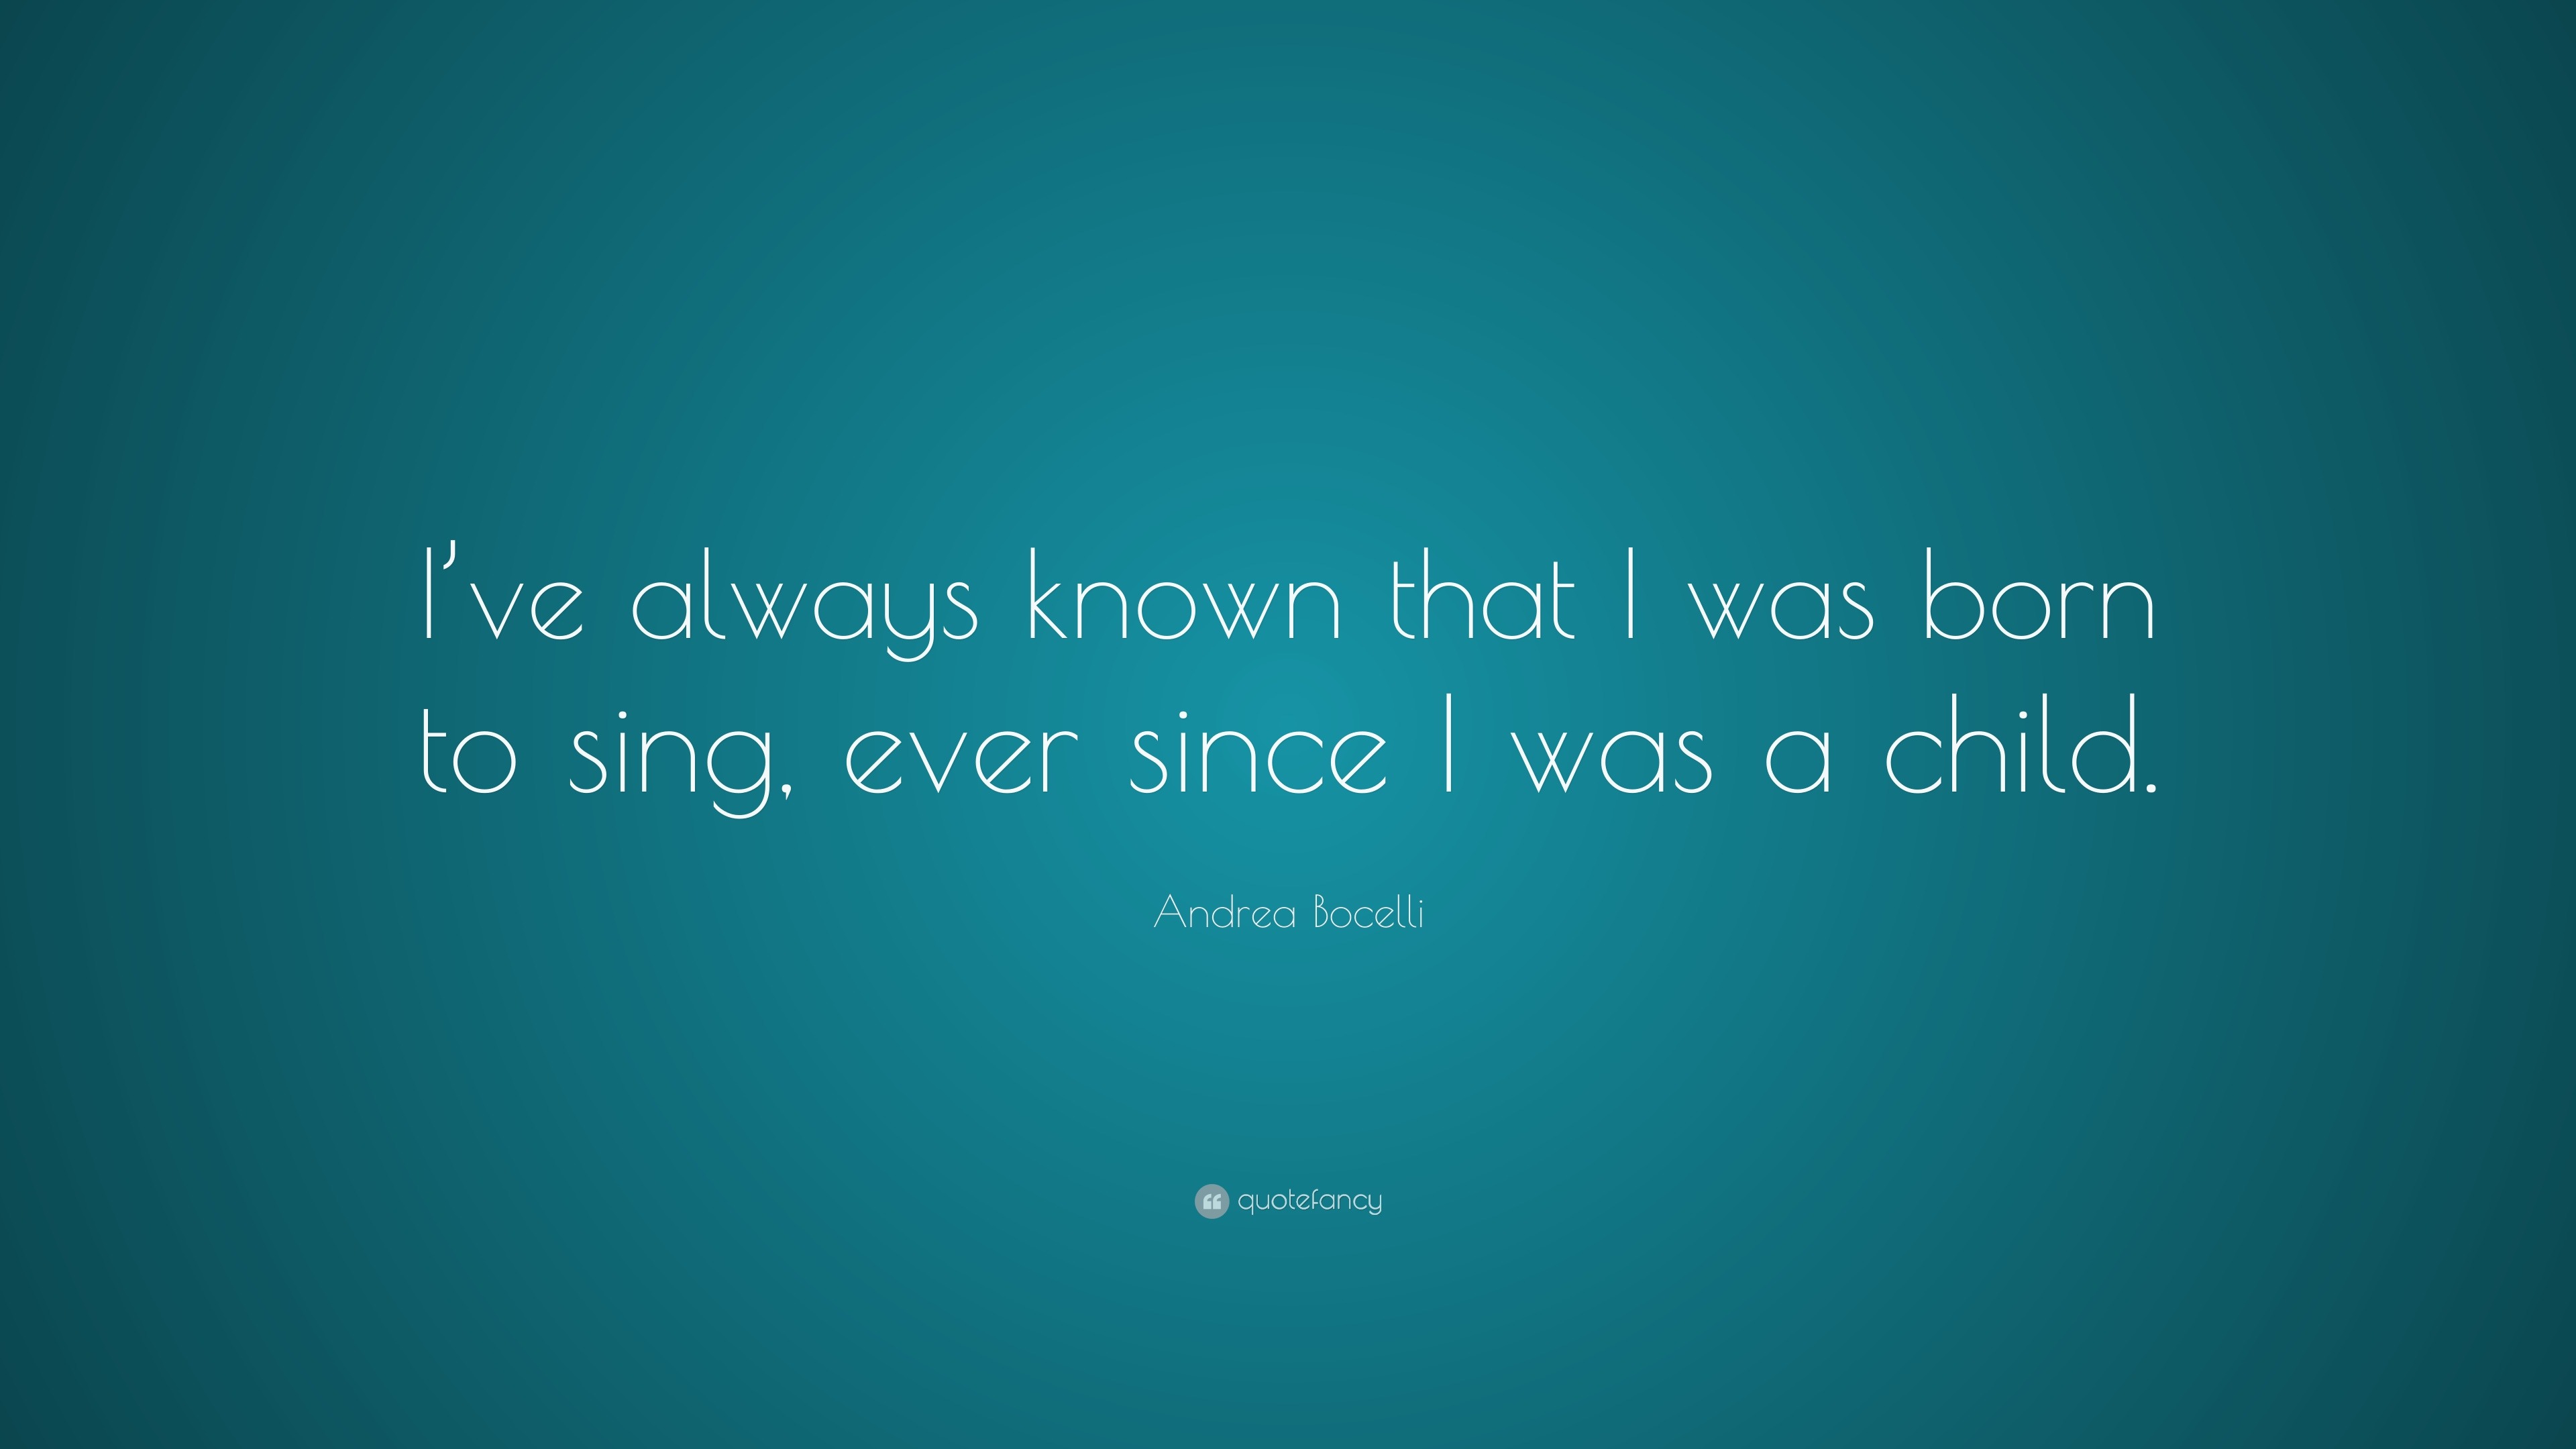 Andrea Bocelli - I am proud of my children. I have tried to convey